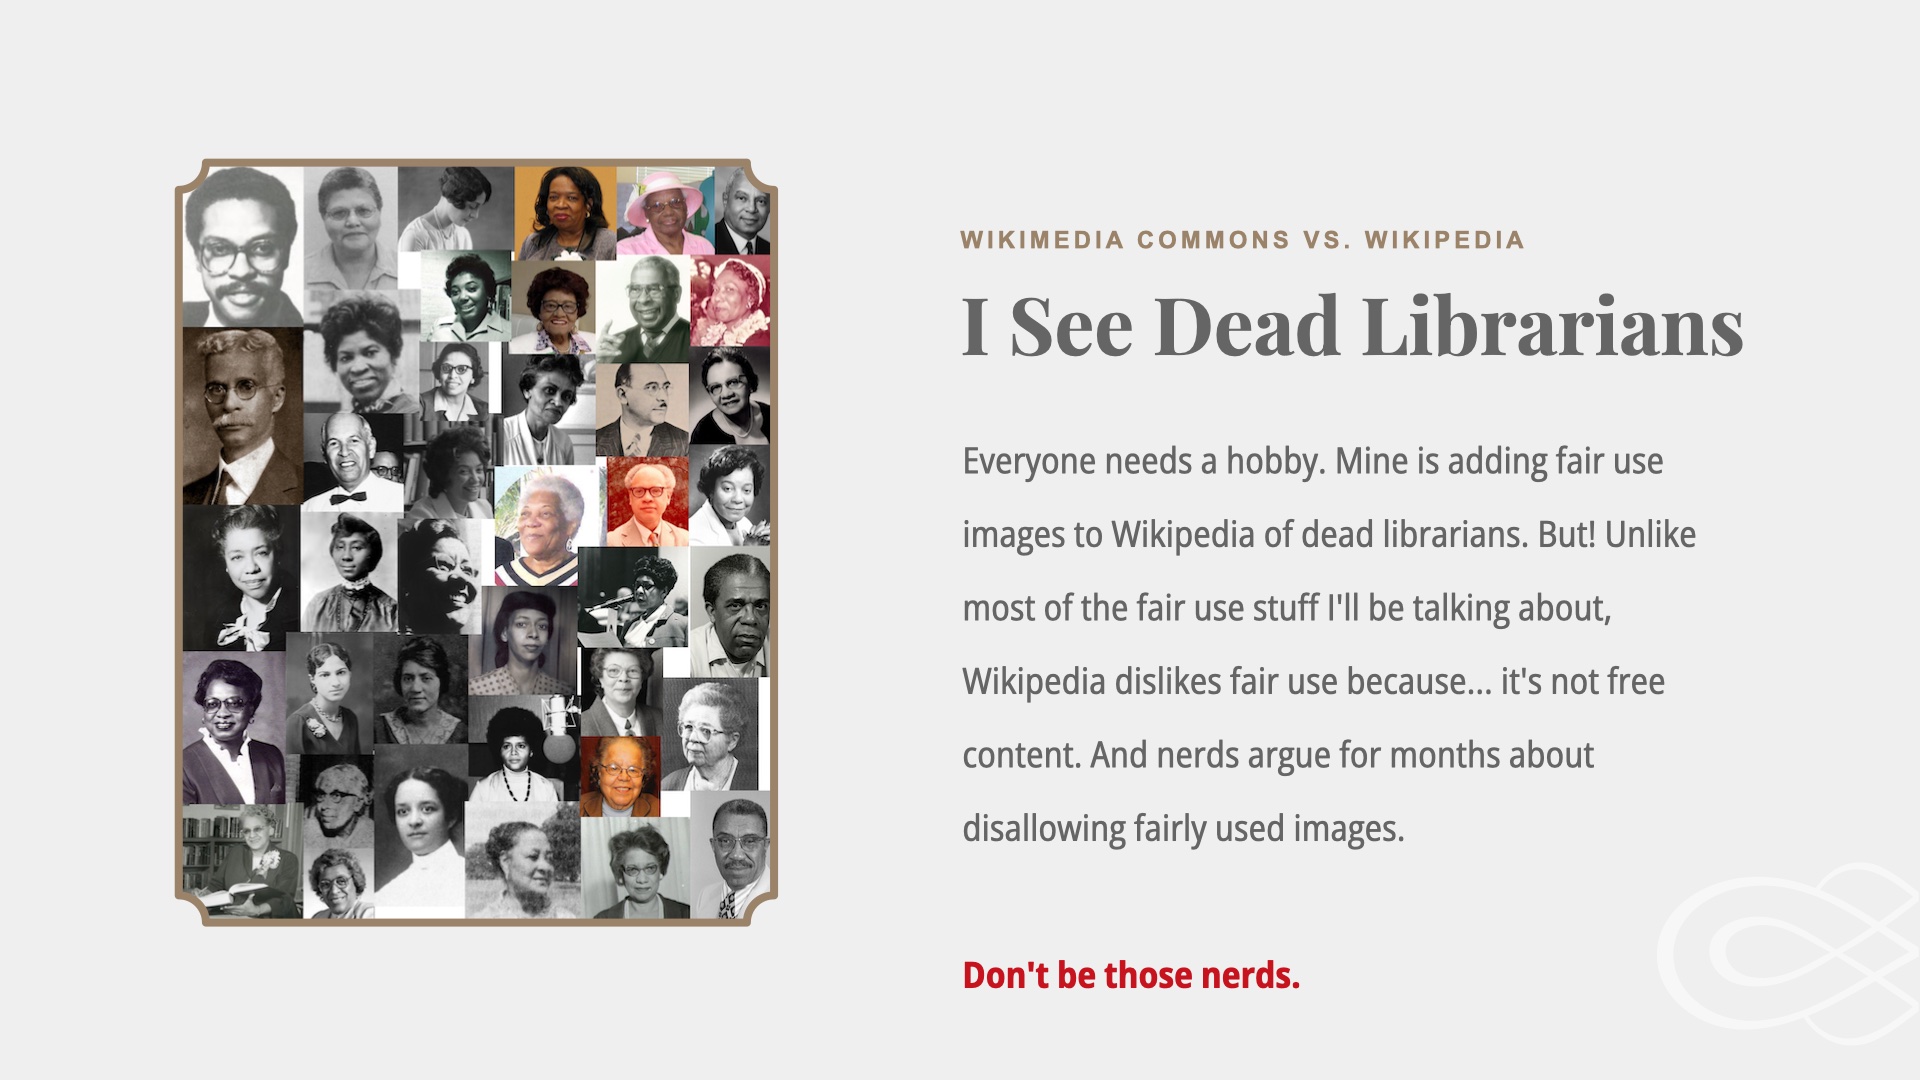 Image composite of headshots of many african american librarians. Text: Wikimedia Commons vs Wikipedia. I see Dead Librarians. Everyone needs a hobby. Mine is adding fair use images to Wikipedia of dead librarians. But! Unlike most of the fair use stuff I'll be talking about, Wikipedia dislikes fair use because... it's not free content. And nerds argue for months about disallowing fairly used images.

Don't be those nerds. 